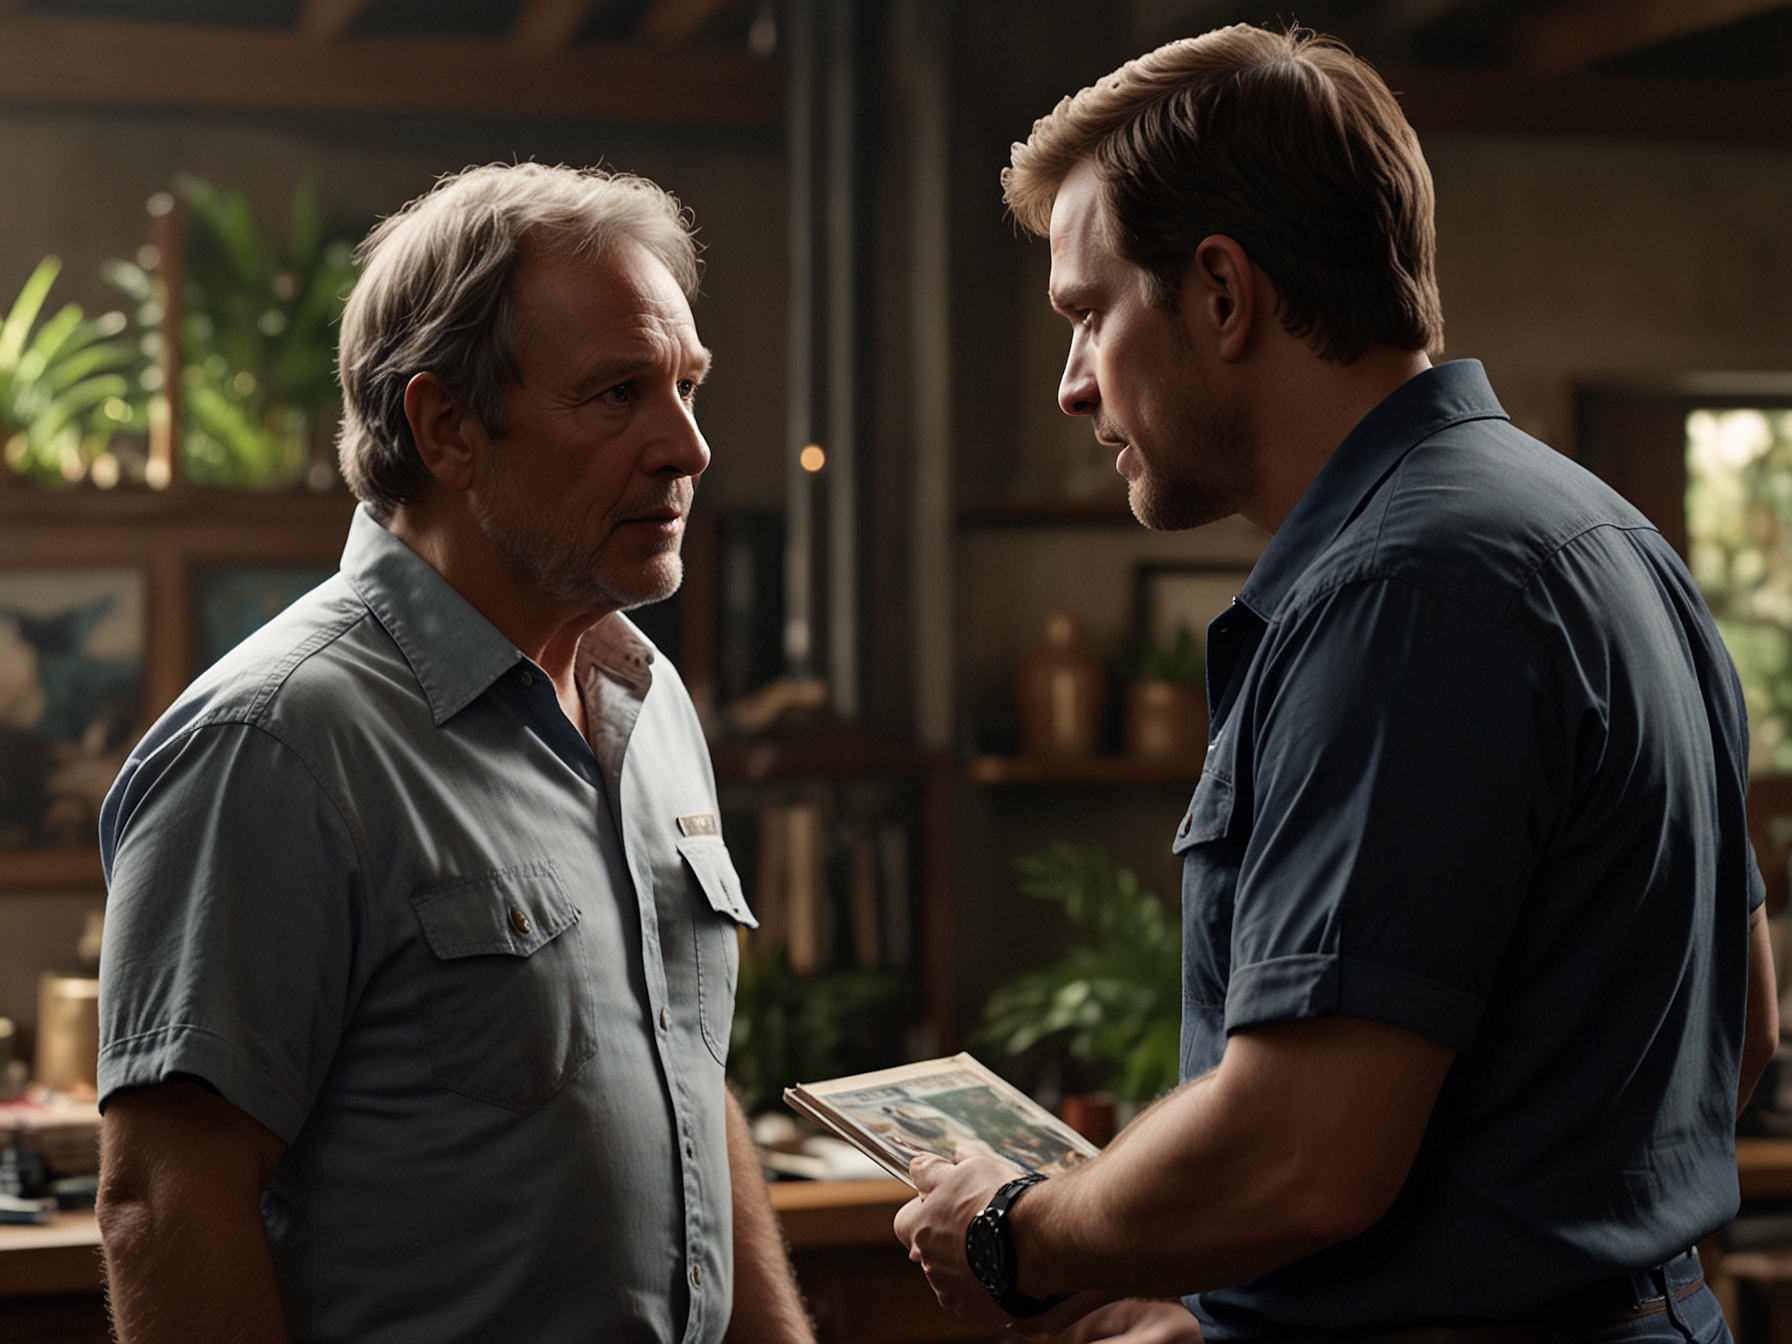 Director Gareth Edwards and writer David Koepp are seen discussing a scene on the set of ‘Jurassic World 4’. The image highlights their collaboration, promising a visually stunning and well-crafted addition to the franchise.